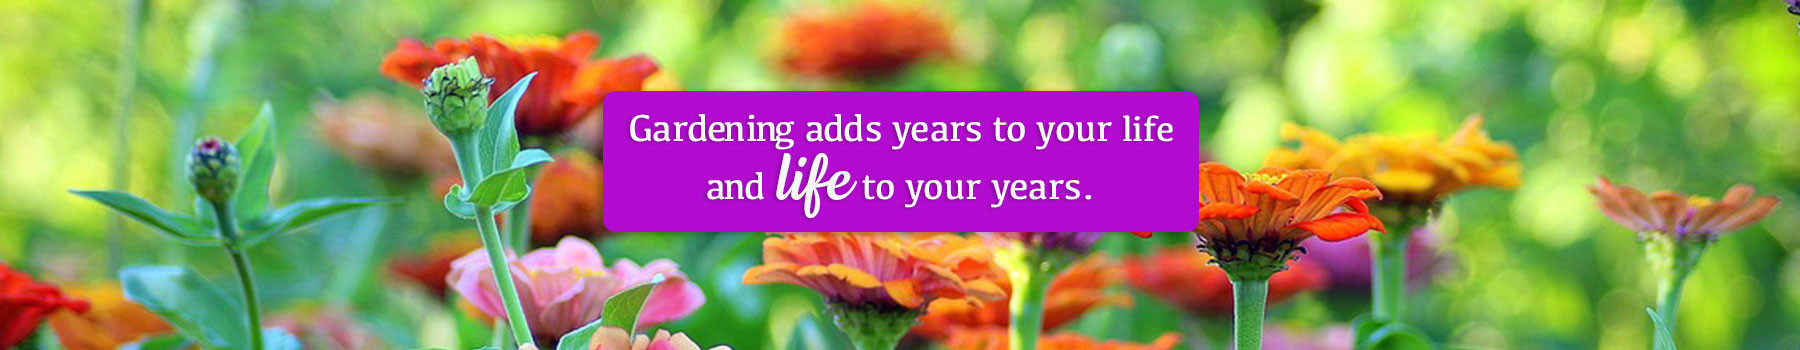 gardening adds years to your life and life to your years - quote